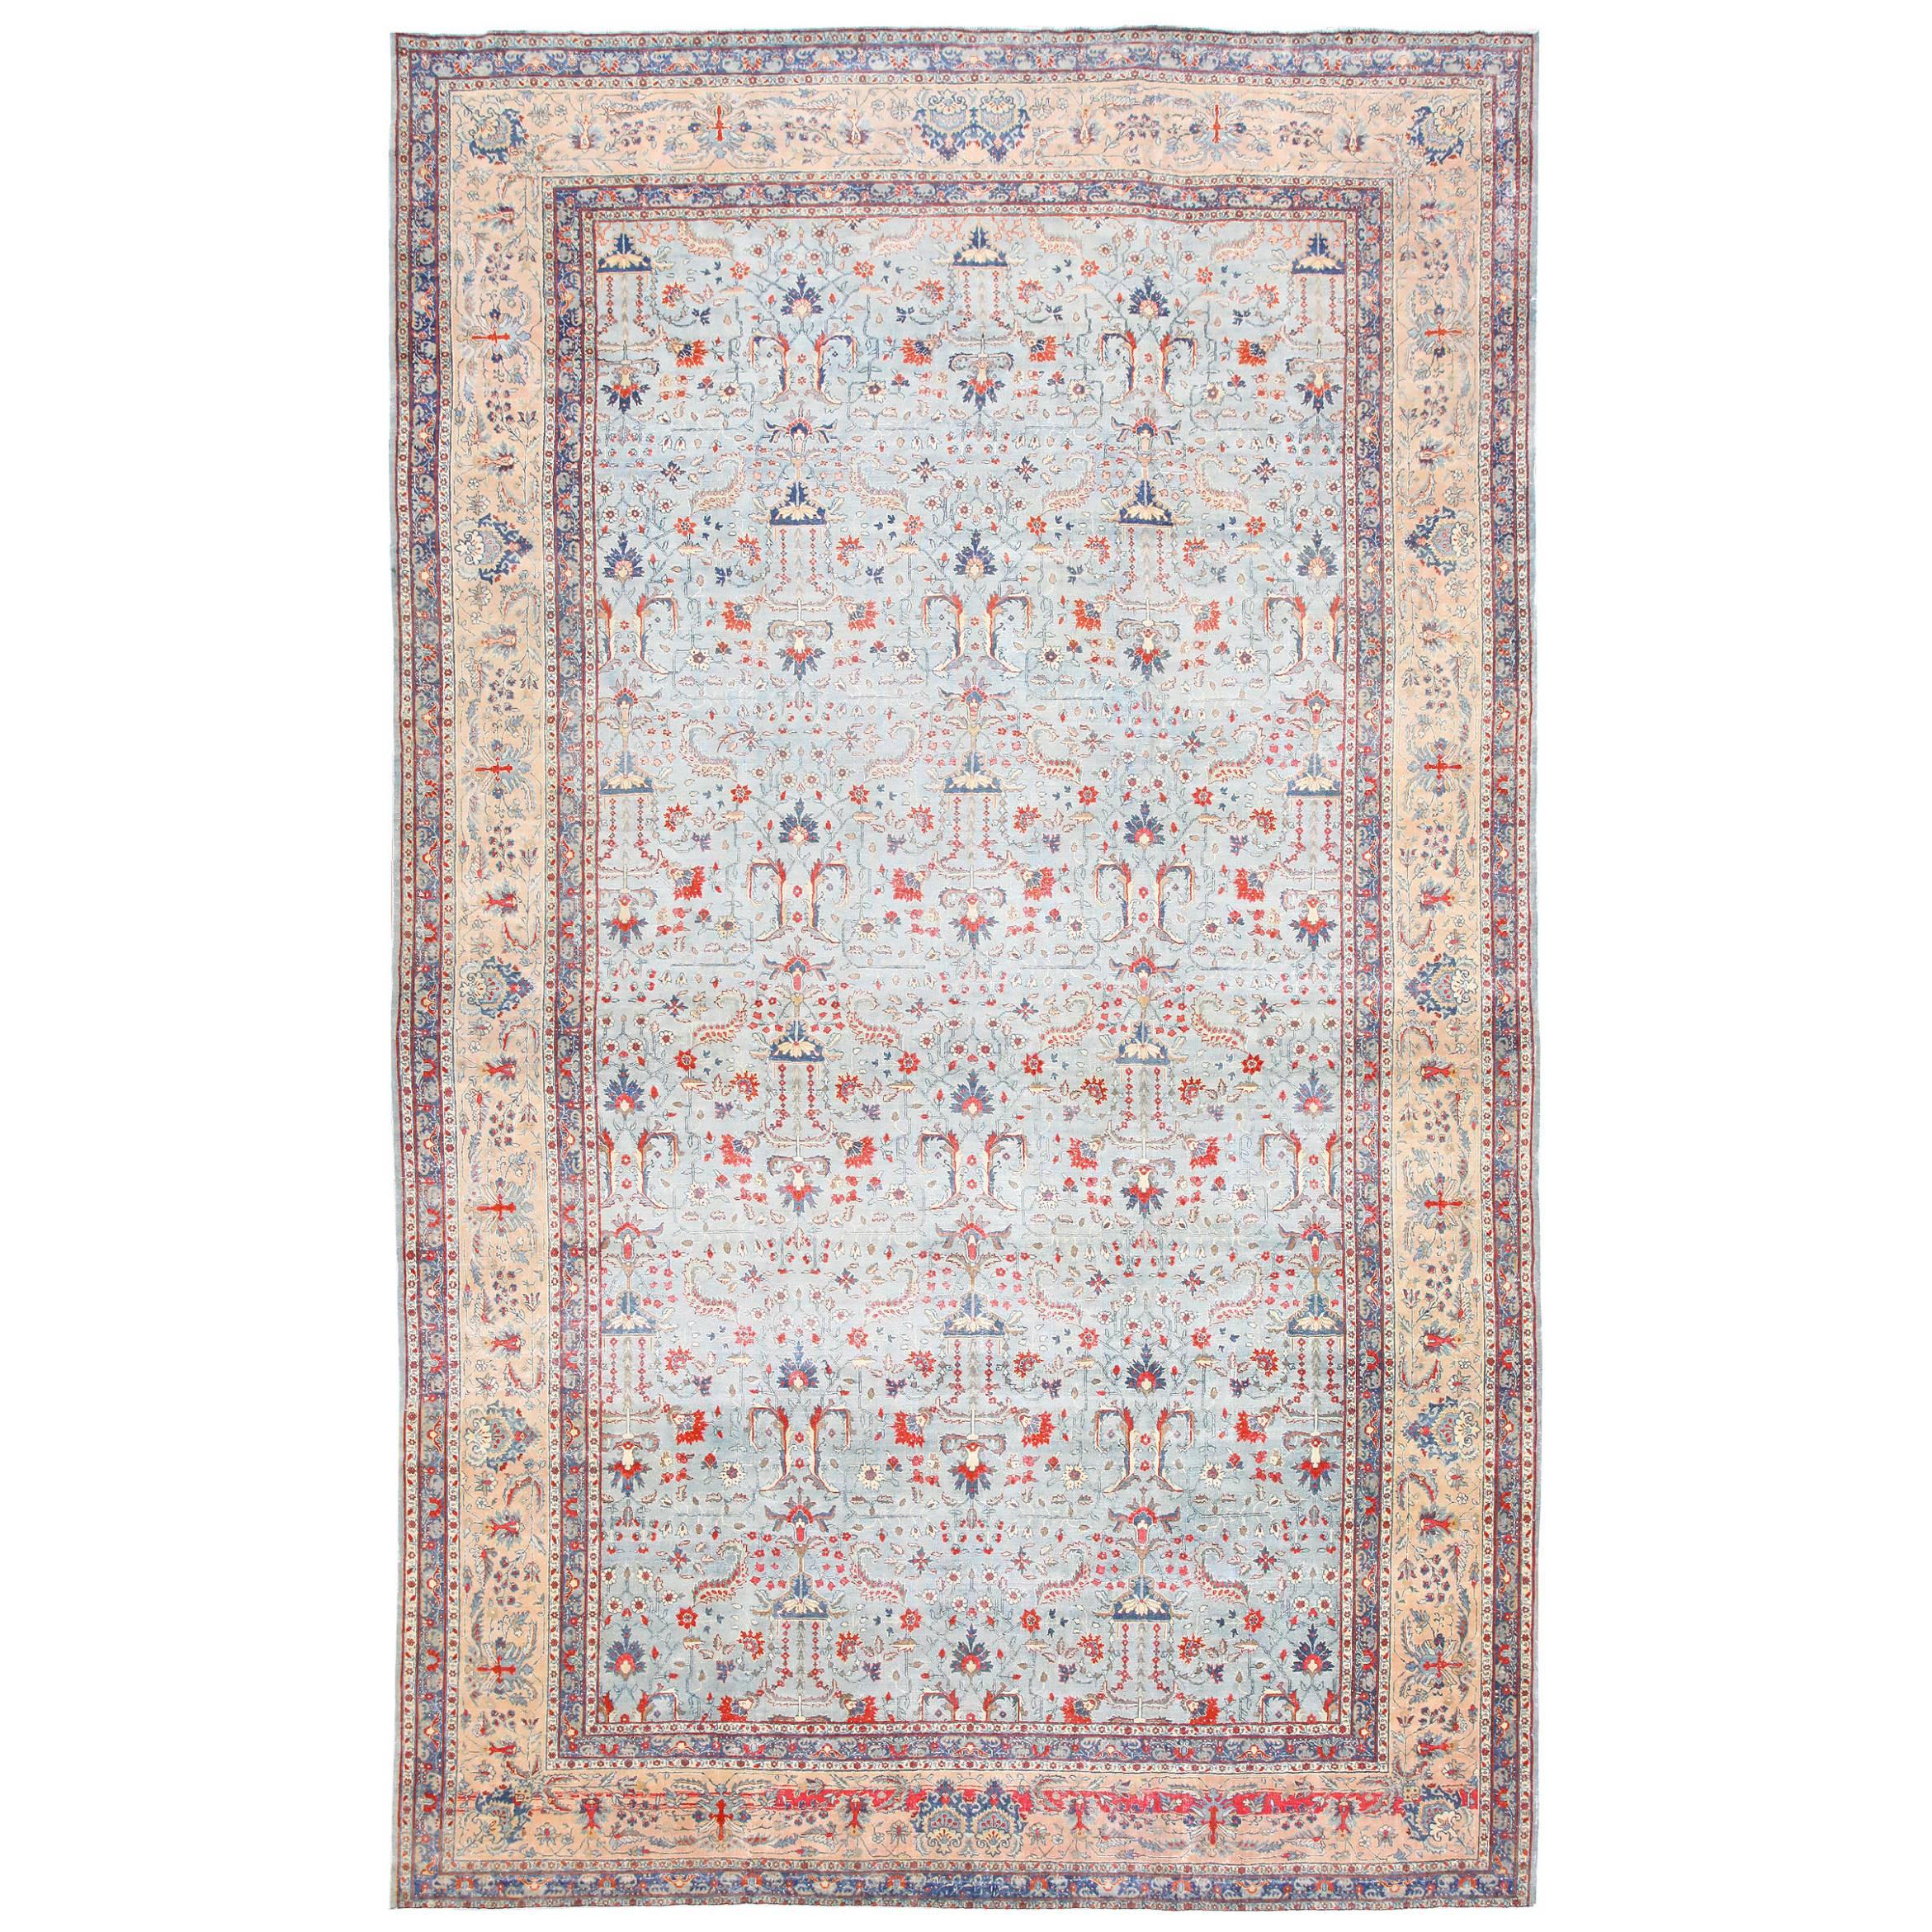 Beautiful and Extremely Decorative Light Blue Antique Persian Tabriz Rug